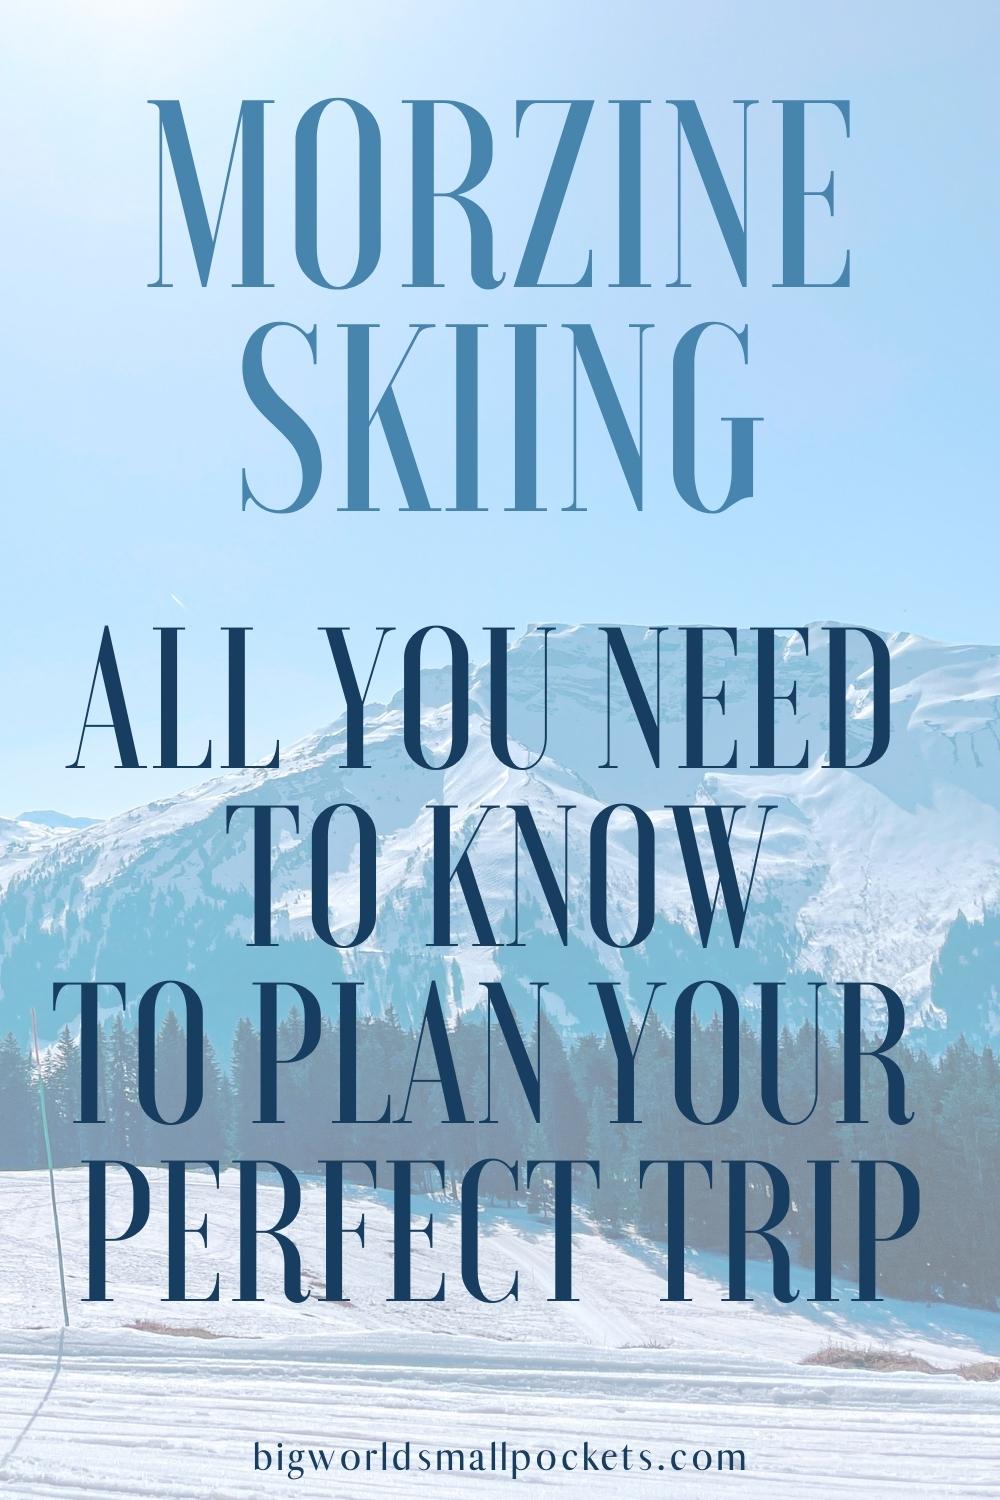 Morzine Skiing All You Need to Know to Plan Your Perfect Trip